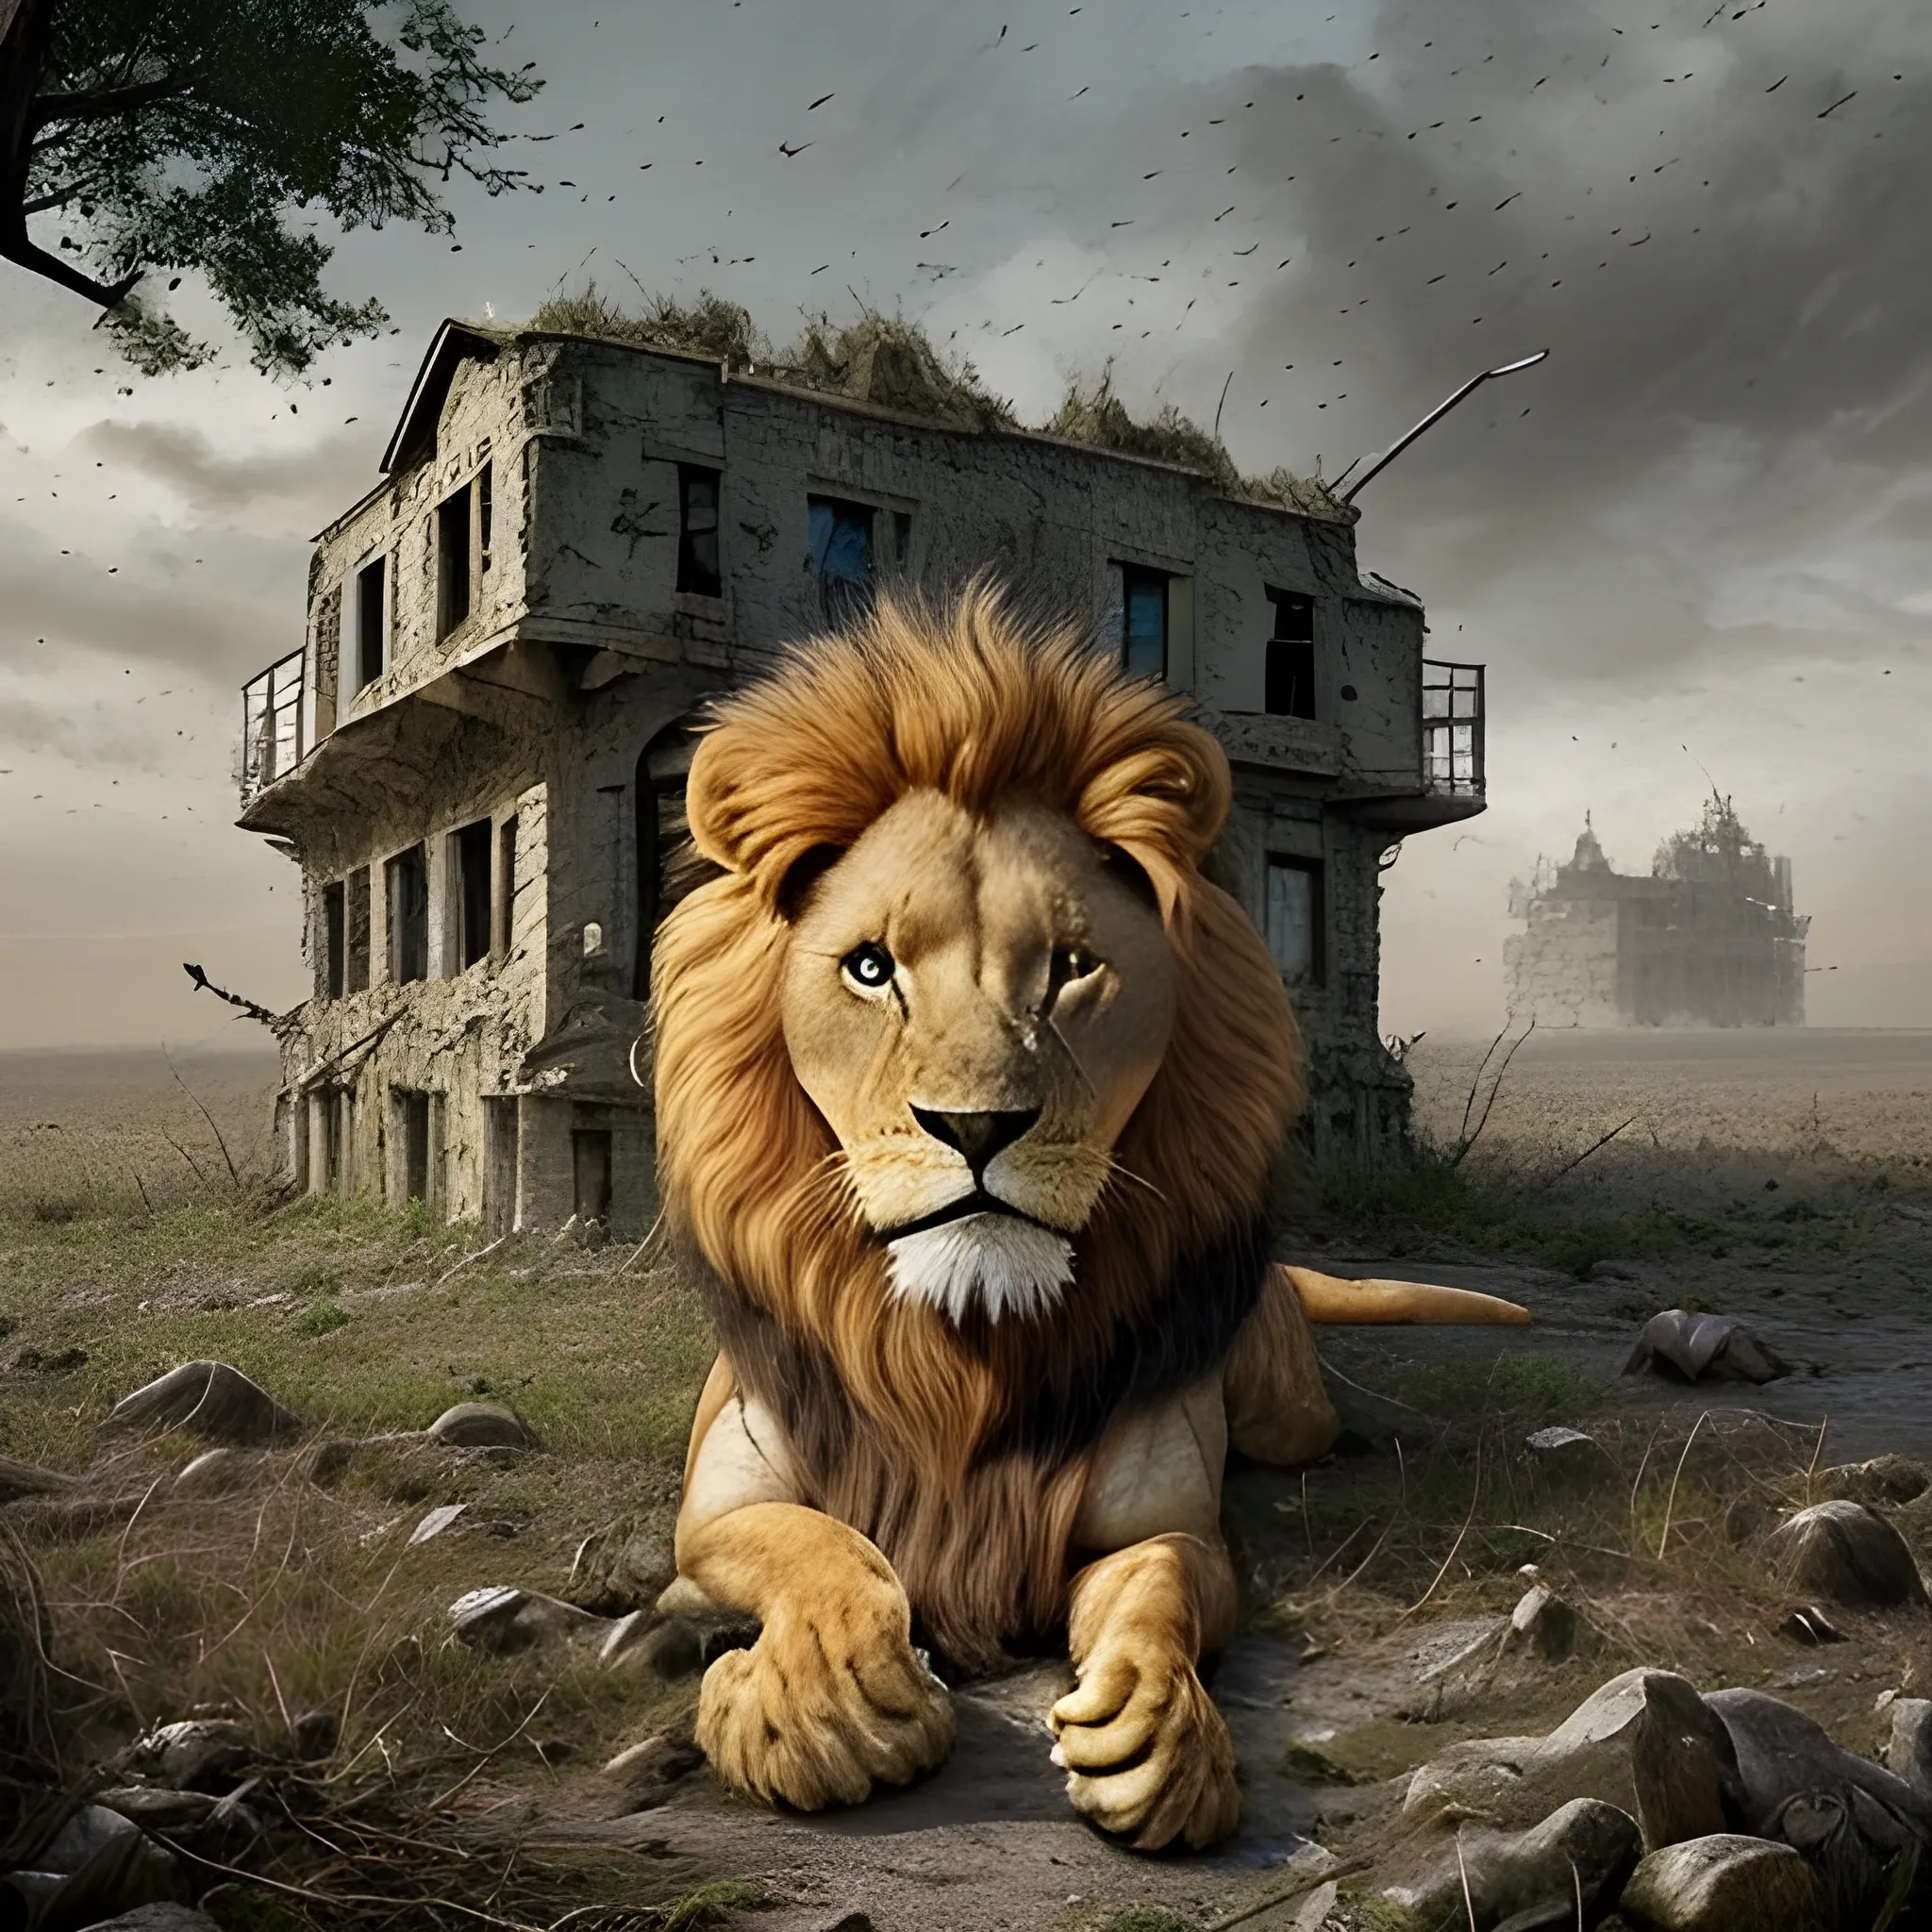 Strong lion, wordwar, army, dangerous, abandoned place